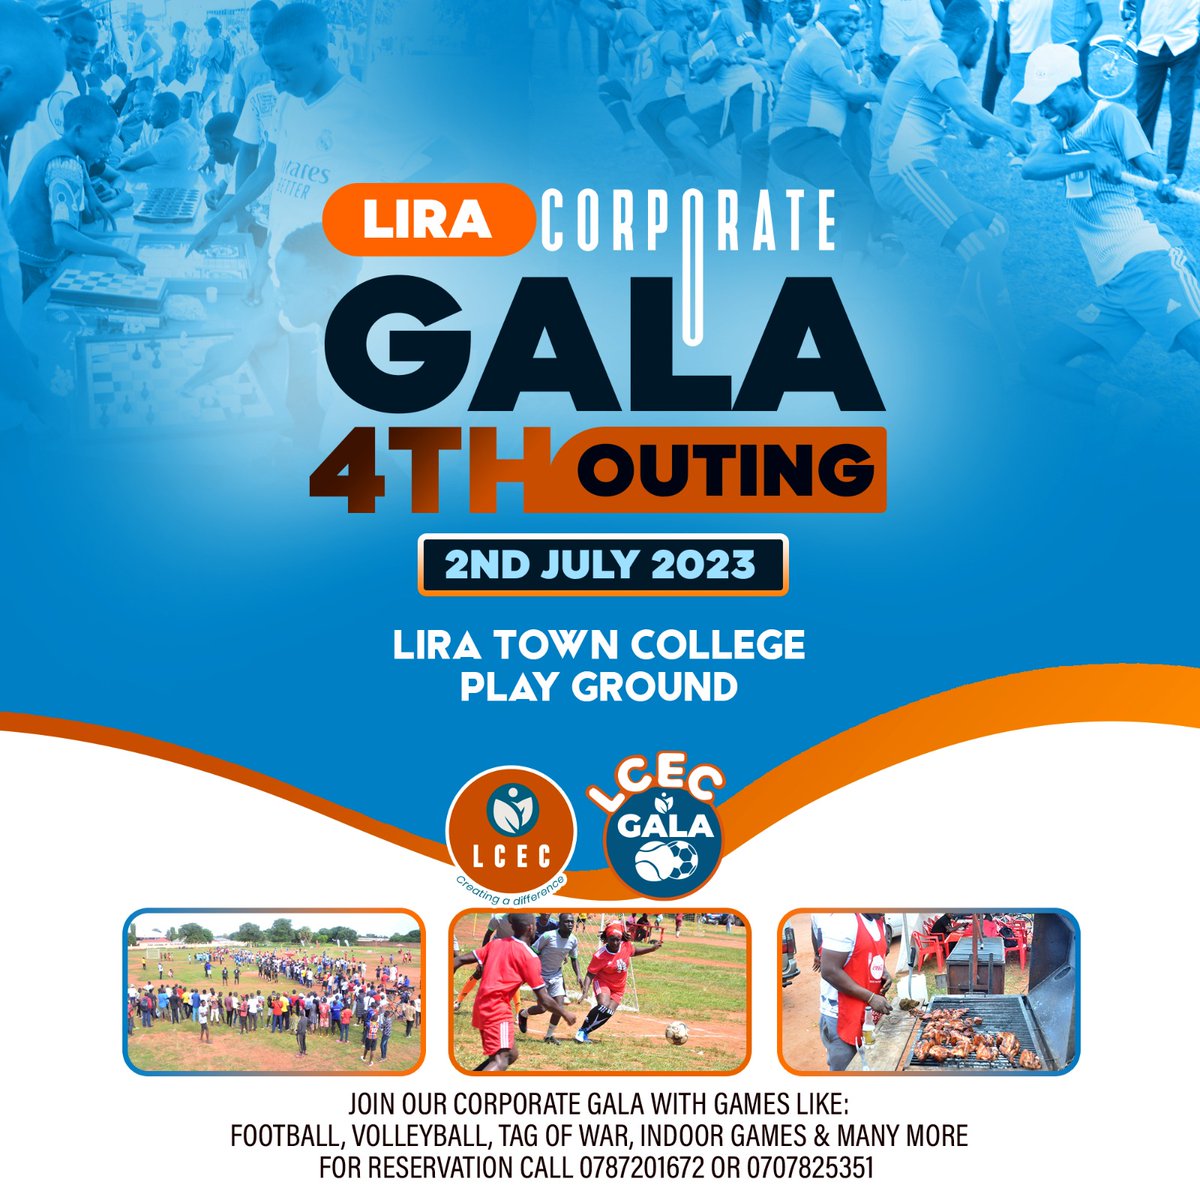 Our next thrilling Outing is right around the corner. Are you ready to unleash your support, spirit and showcase your team's skills? Let us know in the comments if your company is geared up and prepared to take on the challenge.  #LiraCorporateGala #4thOuting